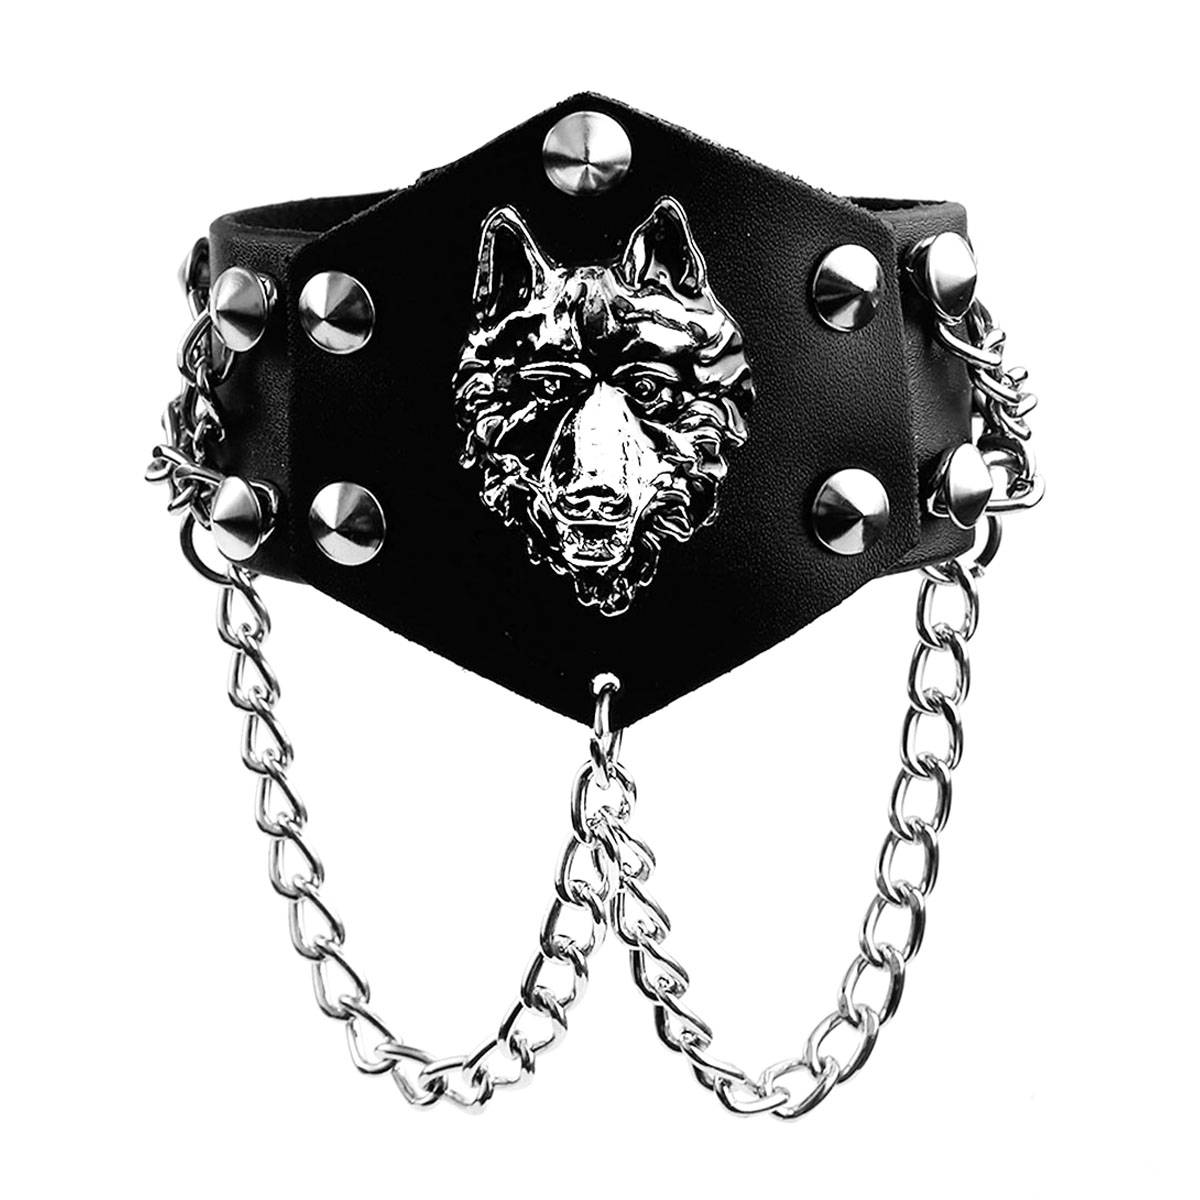 Stylish punk bracelet coyote faux leather adjustable buckle wristband with chains 